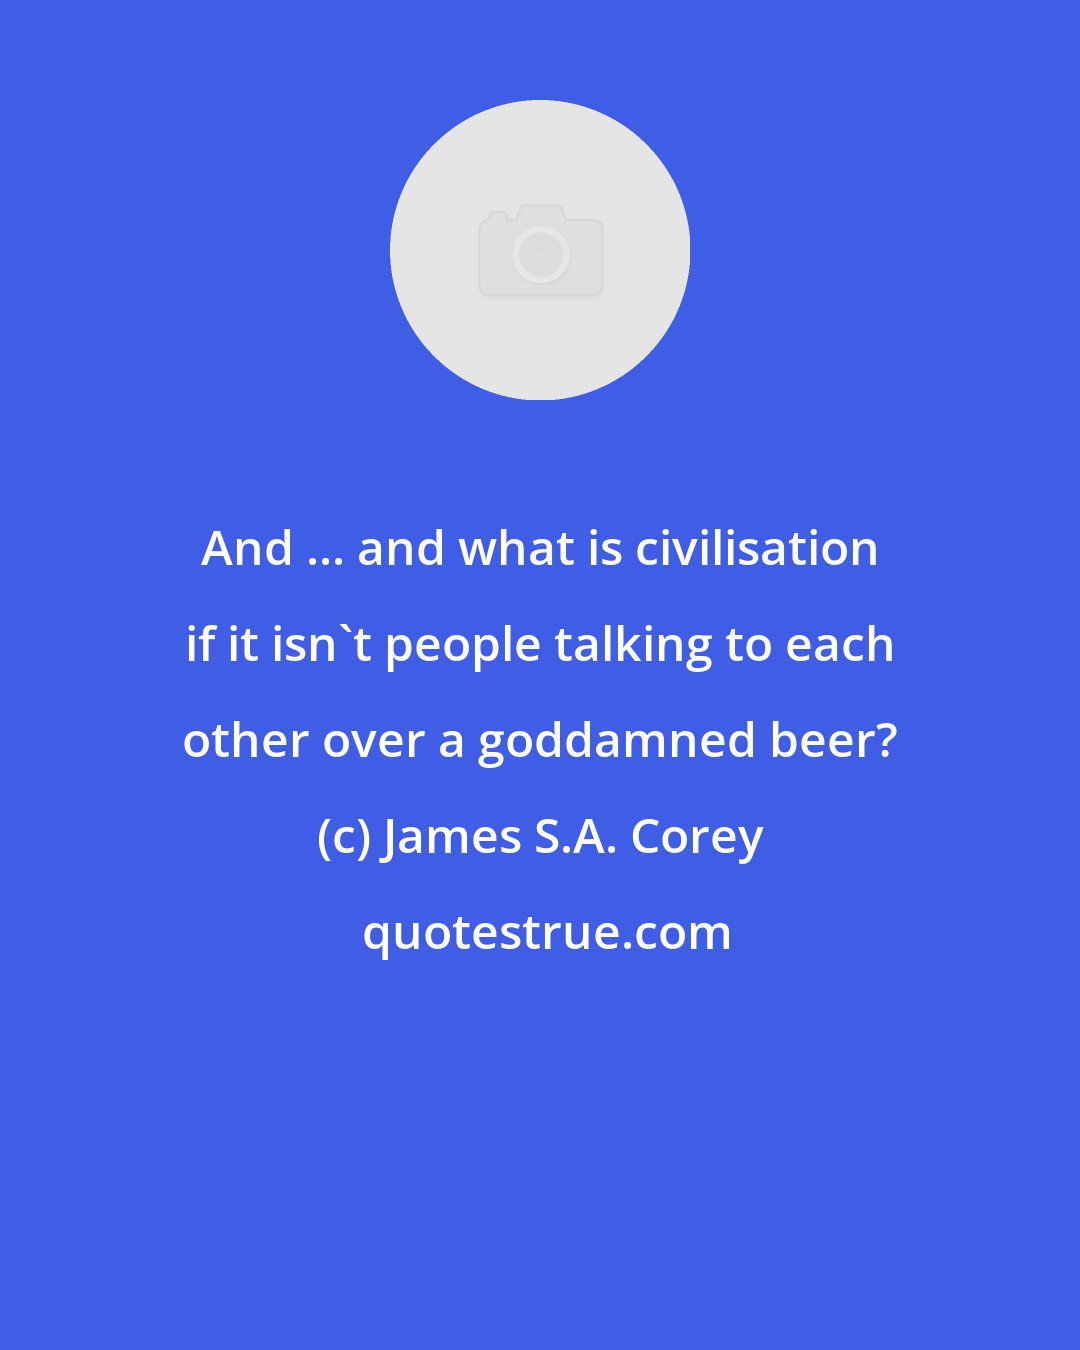 James S.A. Corey: And ... and what is civilisation if it isn't people talking to each other over a goddamned beer?